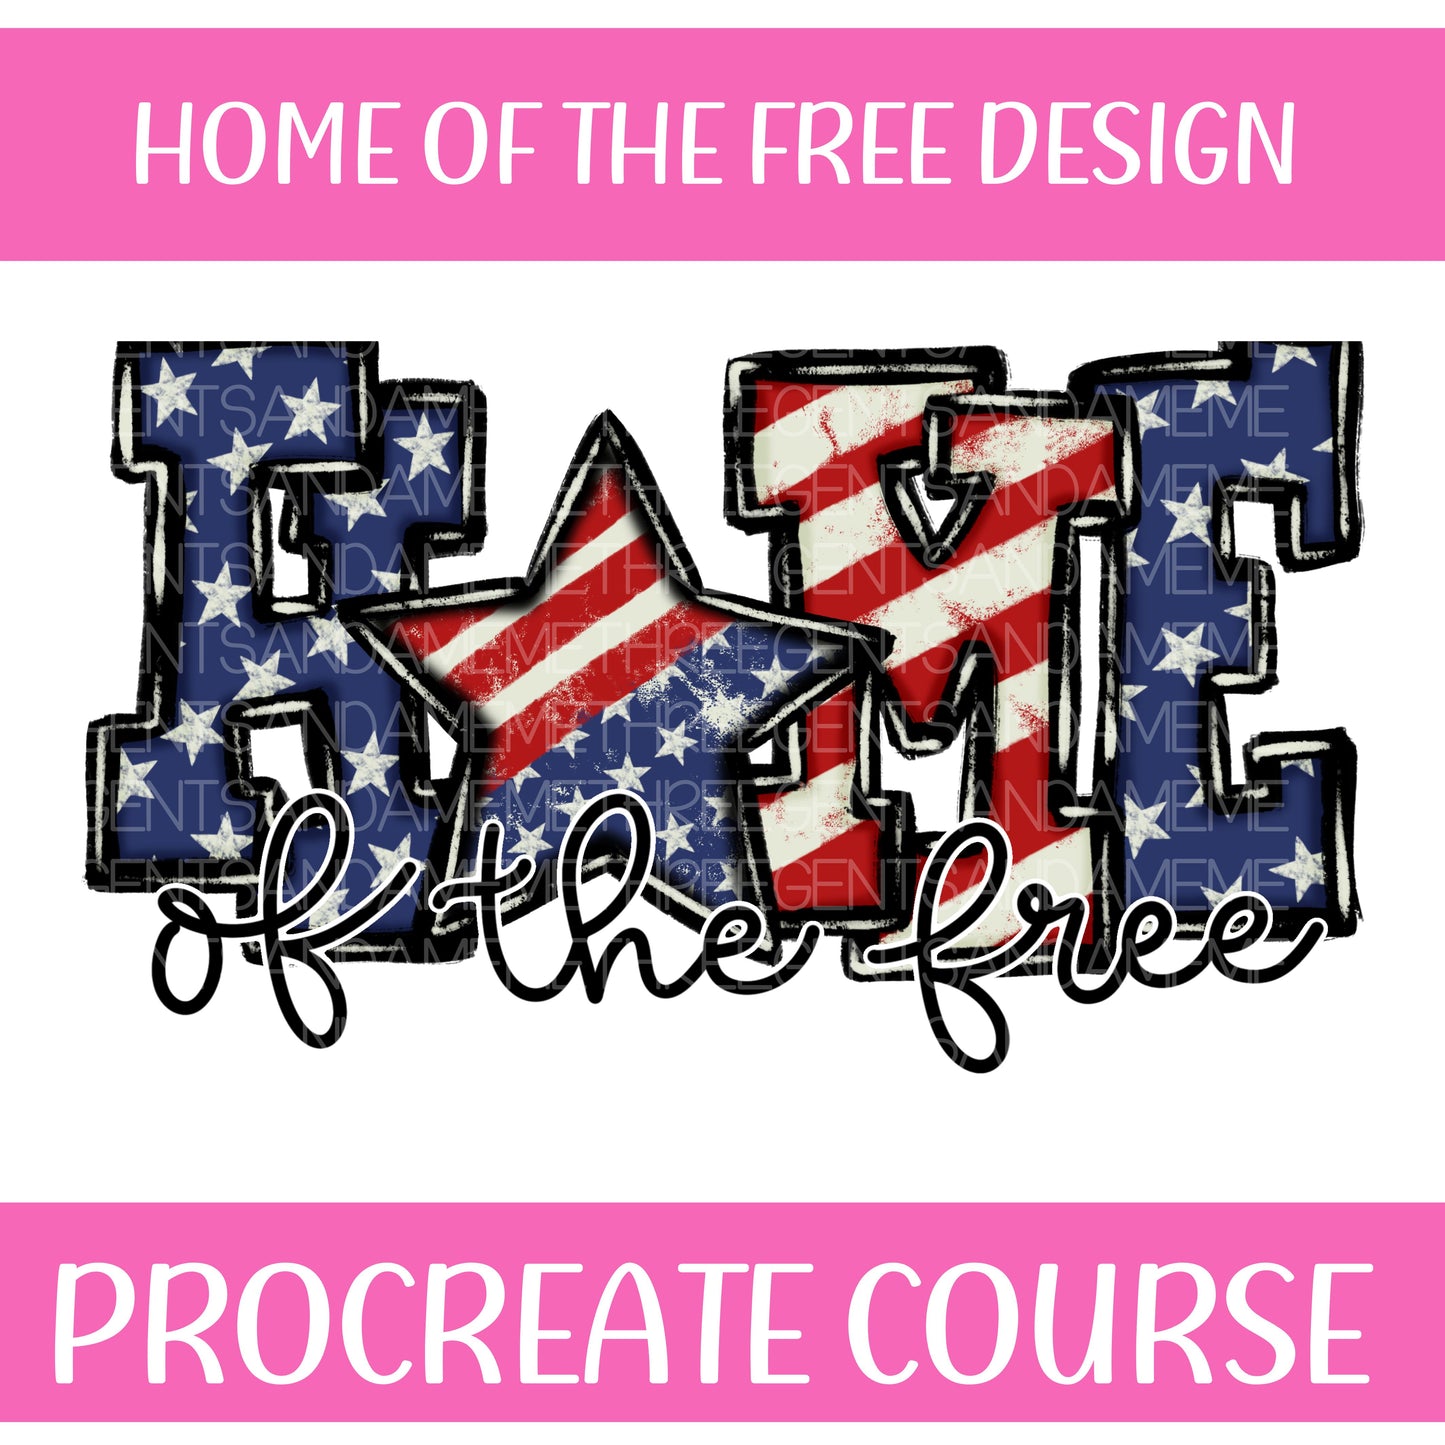 HOME OF THE FREE PROCREATE COURSE